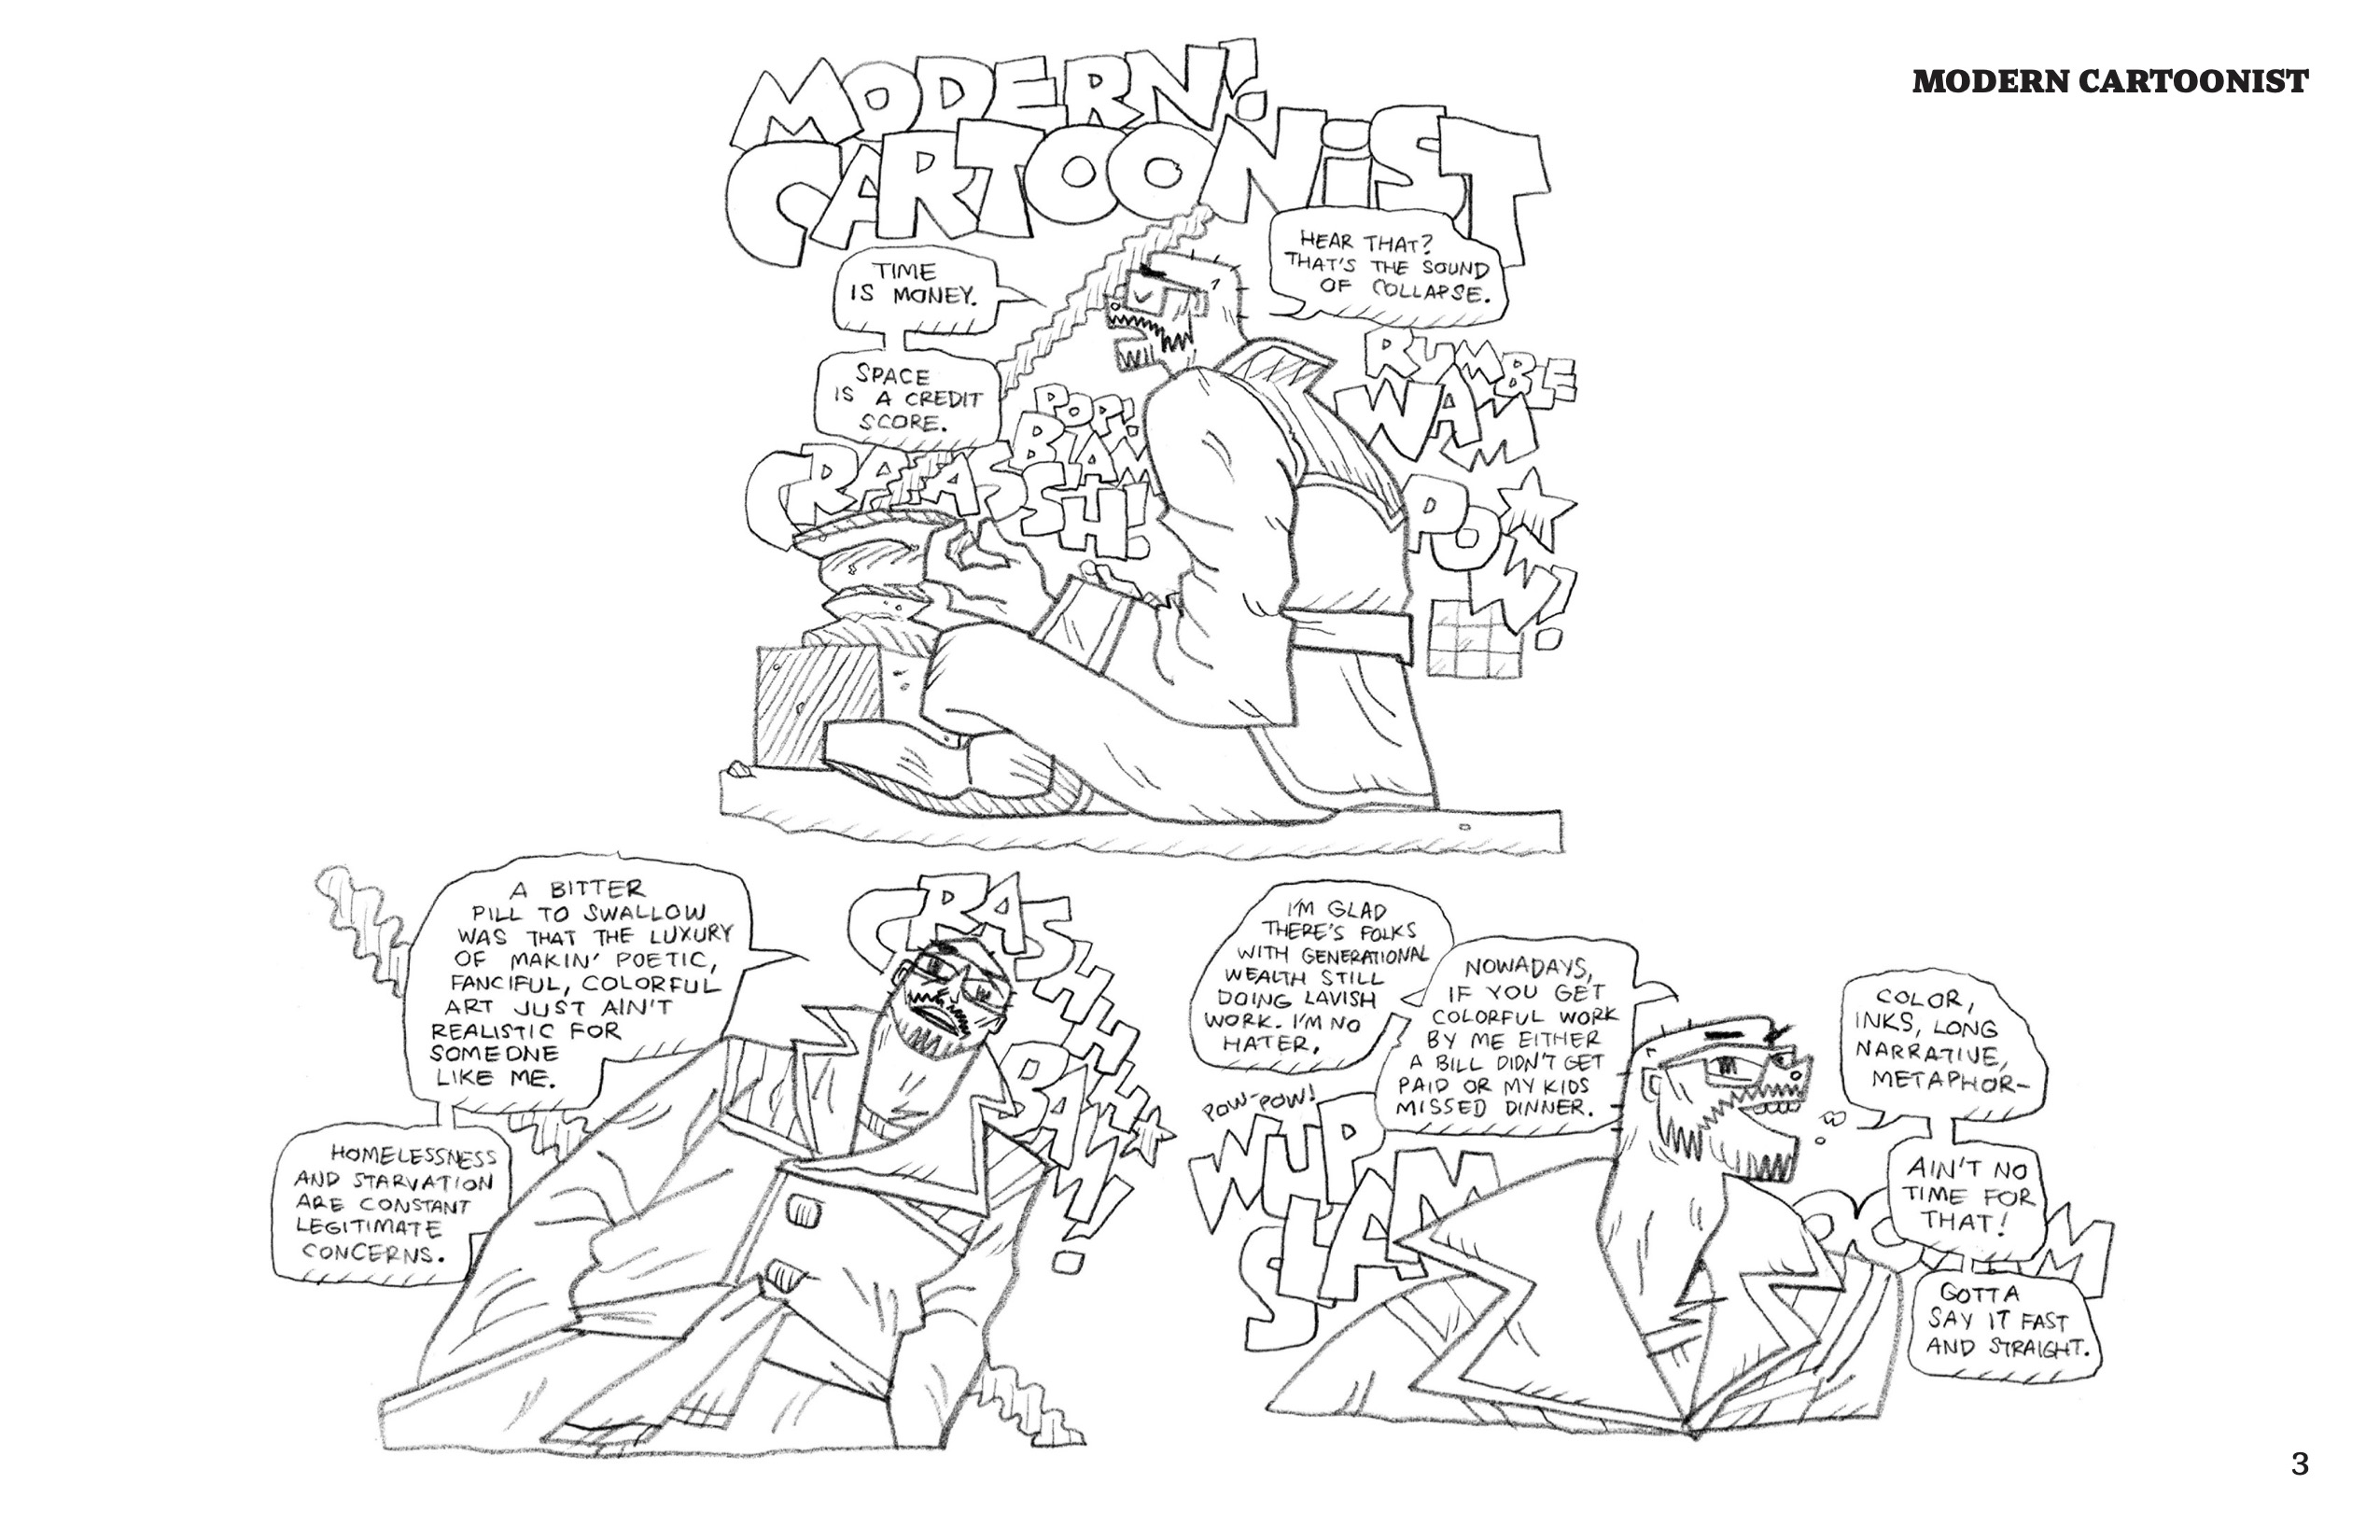 Comics in this series follow the same overall style as Cartoon Show. Black and white line drawings, generally unshaded, without panel borders. The series is broken up into short stories, which will usually span one episode. Derek's character is a tall, mostly bald man with a scruffy, close-clipped mustache and beard. Ballard's lines are lively, with strong gestures and often exaggerated anatomy. 

This episode's title is drawn in large block letters: "Modern! Cartoonist"
Derek sits on the ground with his legs criss-crossed before some sort of stone altar. A long thin stream, probably smoke, stretches diagonally from the altar. Derek appears to be meditating; his eyes are closed and he rests his hands palms-up on his knees. He wears glasses and a jacket with a large decorative collar and other stylish elements. Derek begins his monologue, "Time is money. Space is a credit score."
Onomatopoeia, drawn in large block letters, fill the background: "Pop! Blam! Crash!"
Derek continues, "Hear that? That's the sound of collapse."
The onomatopoeia continue: "Rumble! Wam! Pow!"

Derek faces the reader, leaning towards the left at an angle. He says, "A bitter pill to swallow was that the luxury of makin' poetic, fanciful, colorful art just ain't realistic for someone like me. Homelessness and starvation are constant legitimate concerns."
"Crash! Bam!"

Derek turns to his side, still looking towards the reader. He smiles cheekily and continues, "I'm glad there's folks with generational wealth still doing lavish work. I'm no hater. Nowadays, if you get colorful work by me either a bill didn't get paid or my kids missed dinner."
"Pow-pow! Wup! Slam! Booom!"
"Color, inks, long narrative, metaphorâ€”ain't no time for that! Gotta say it fast and straight."